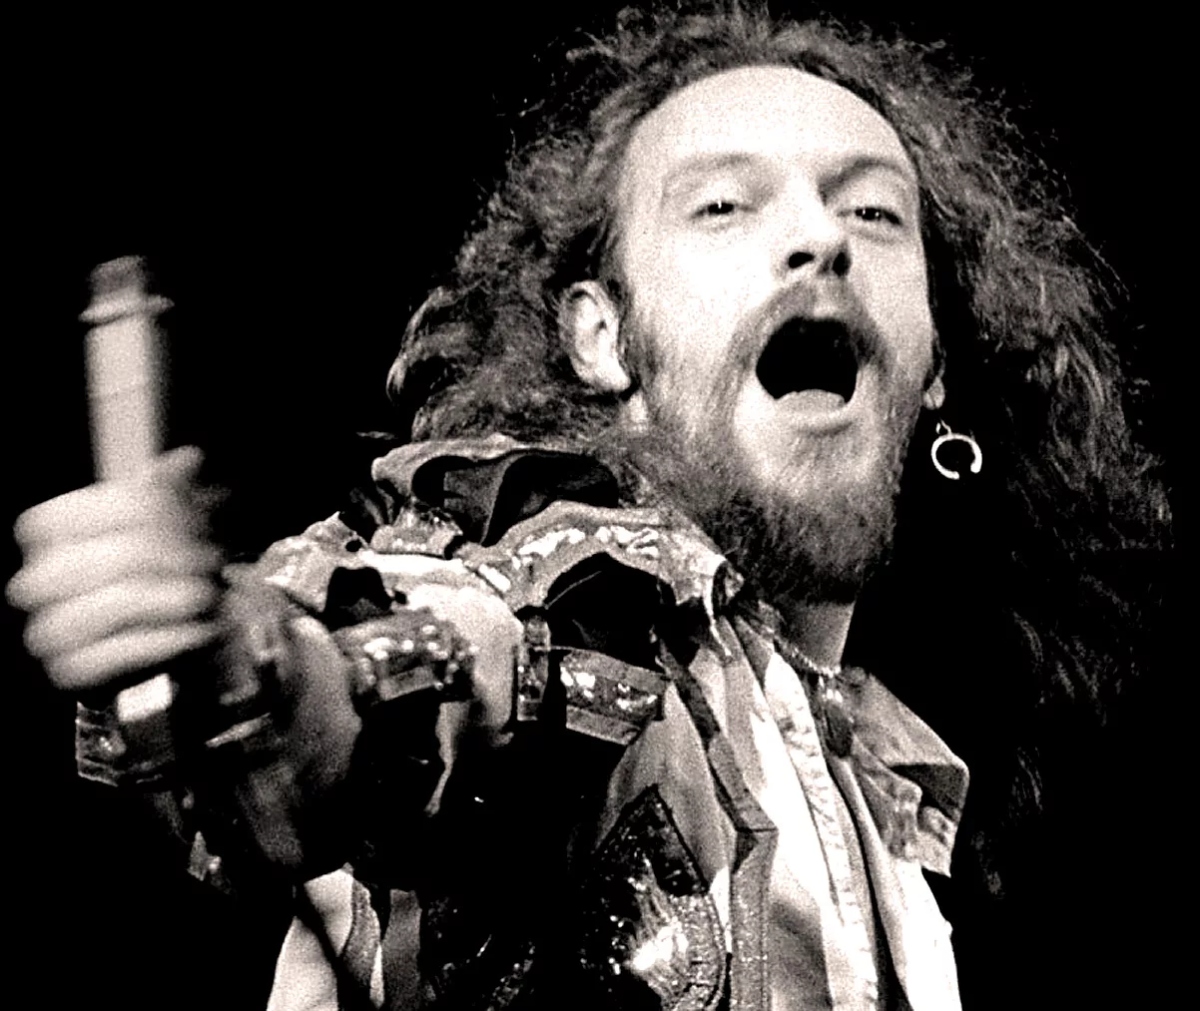 Jethro Tull leader Ian Anderson in his youth